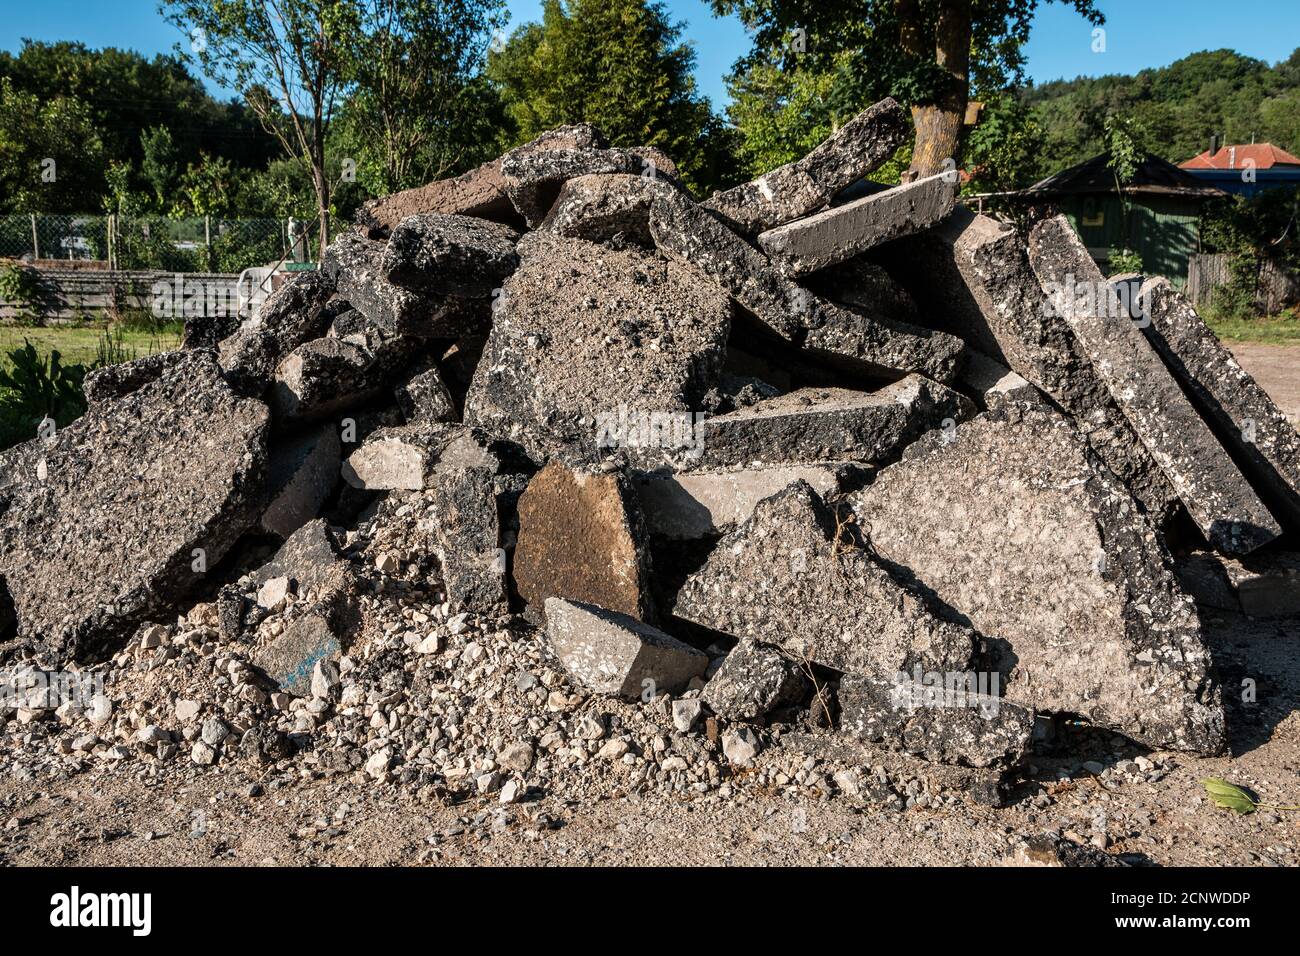 A bunch of building waste on the ground Stock Photo